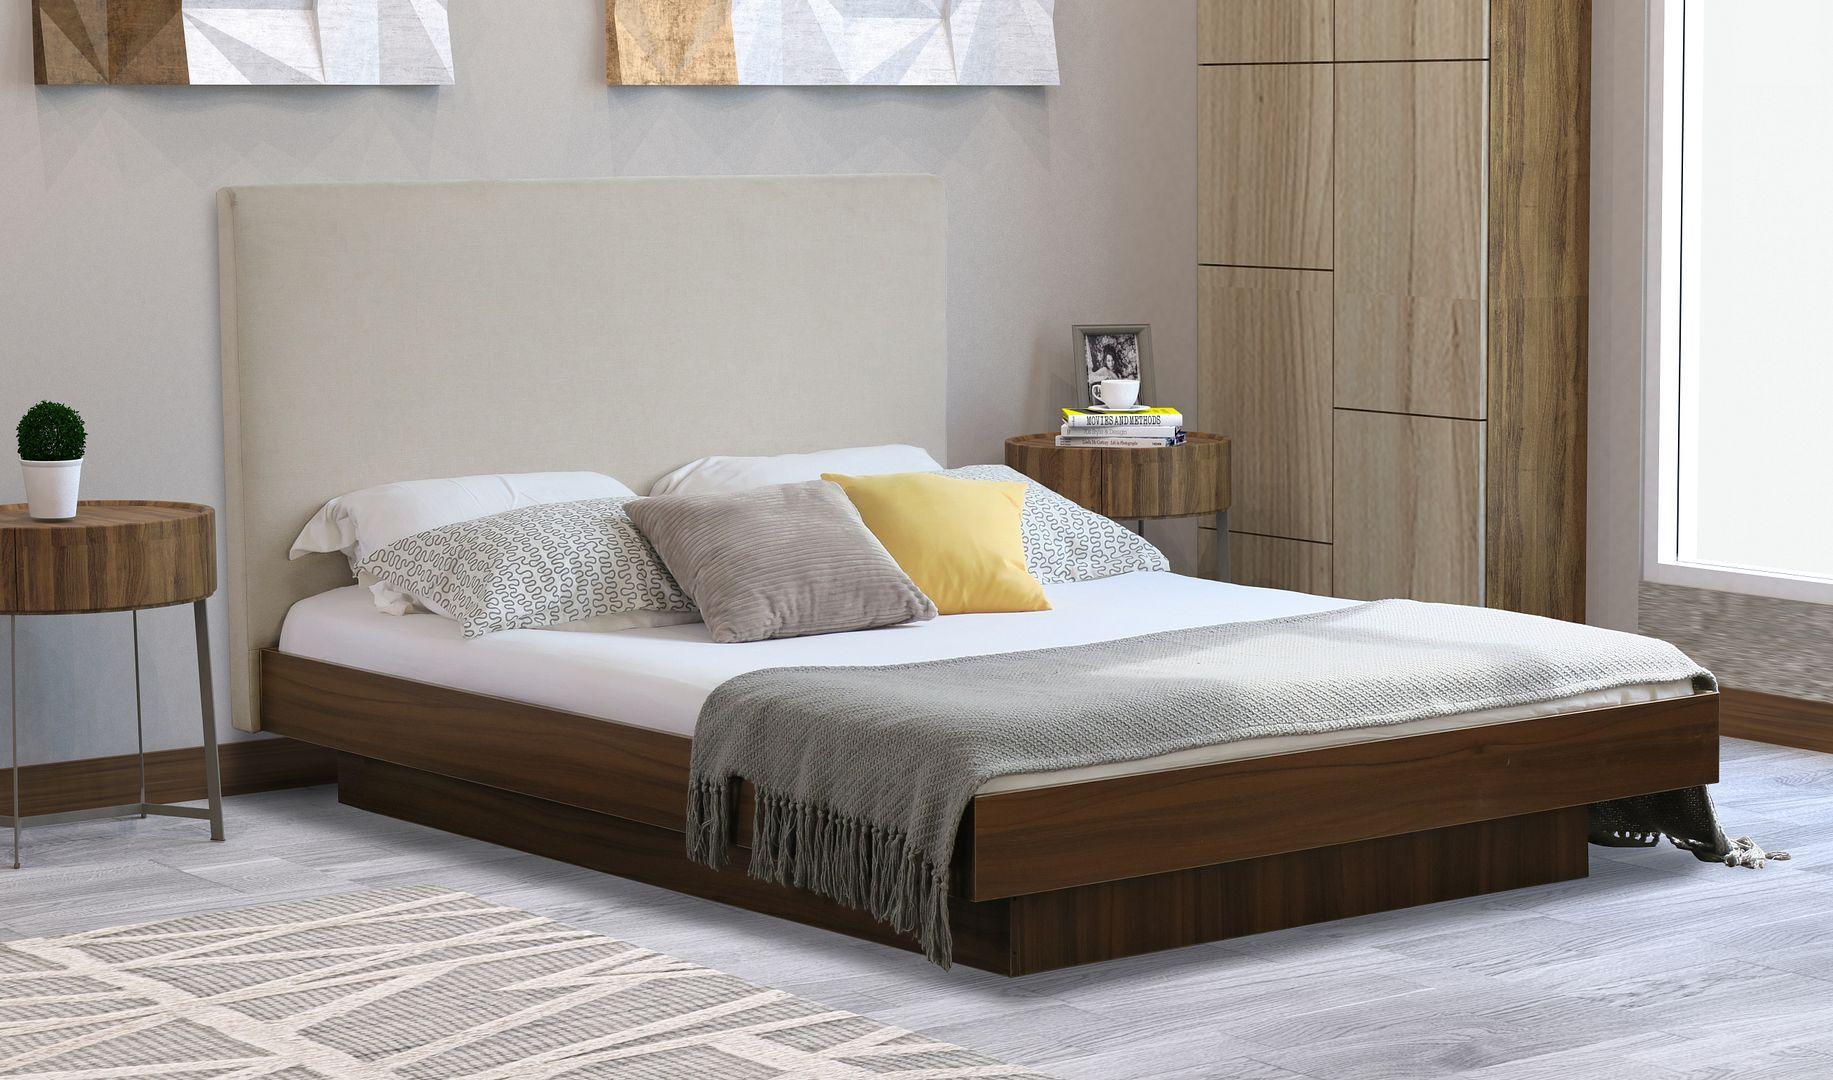 Cecilion Double Beige White Oak Fabric Floating Walnut Bed Frame